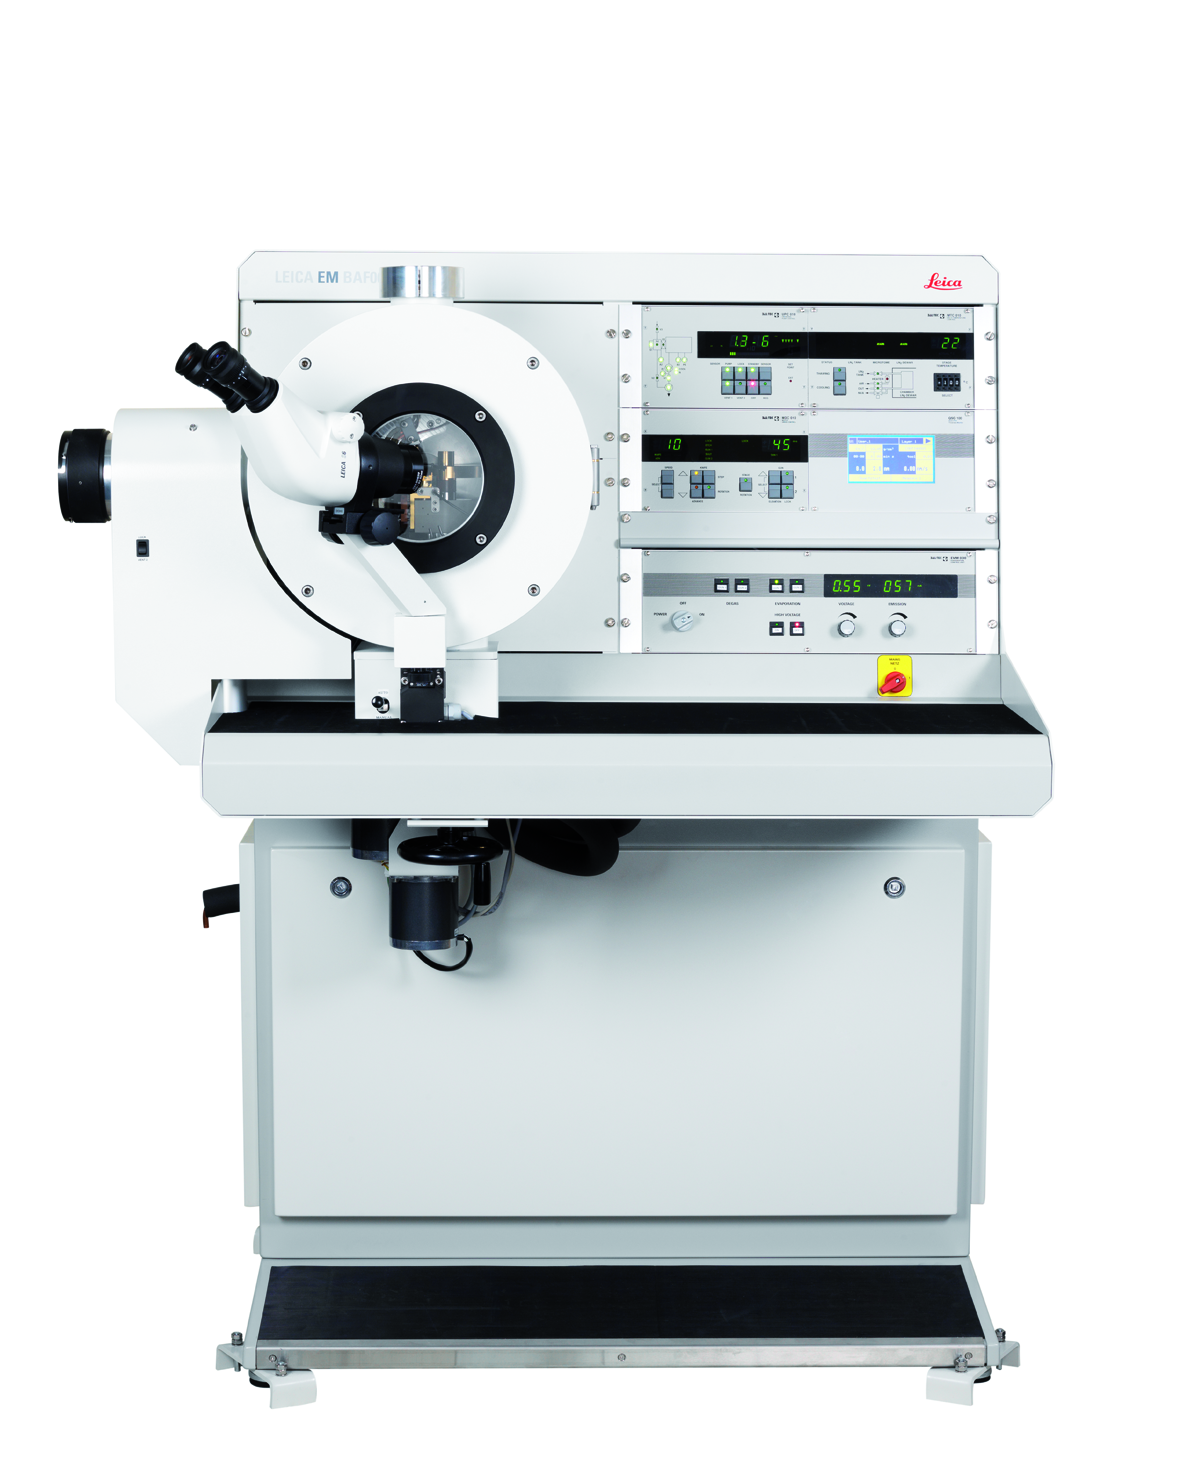 The Leica BAF060 - Sample Preparation System for Freeze Drying, Etching & Freeze Fracturing